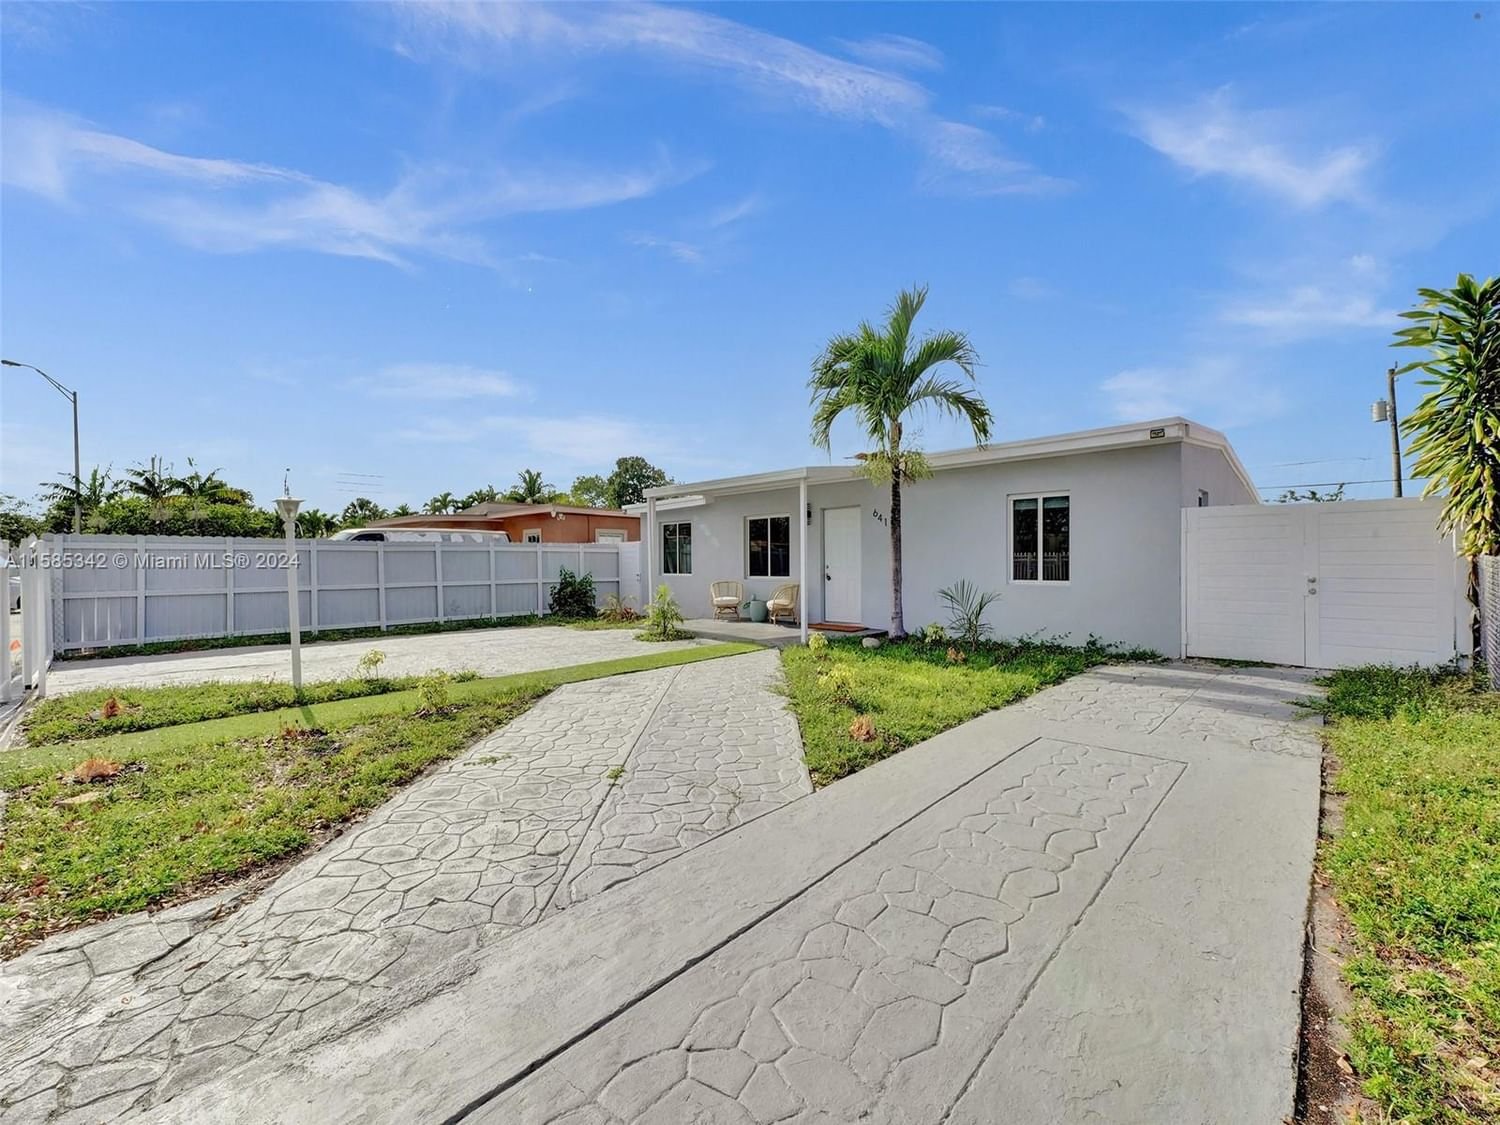 Real estate property located at 641 44th St, Miami-Dade County, HIALEAH 16 ADDN AMD & REV, Hialeah, FL